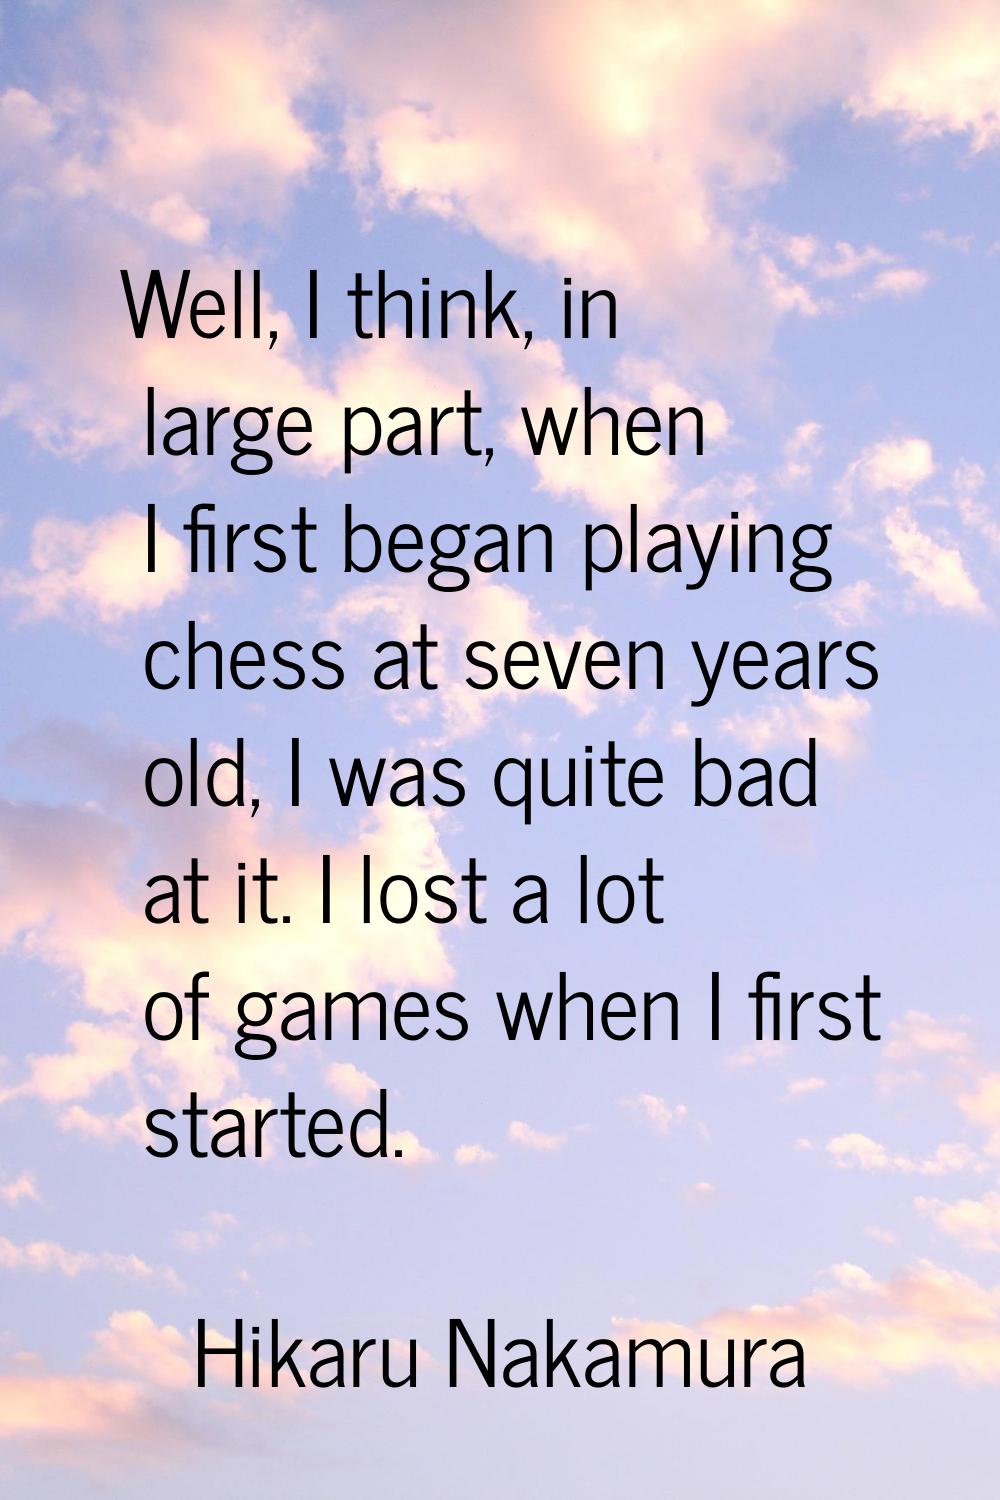 Well, I think, in large part, when I first began playing chess at seven years old, I was quite bad 